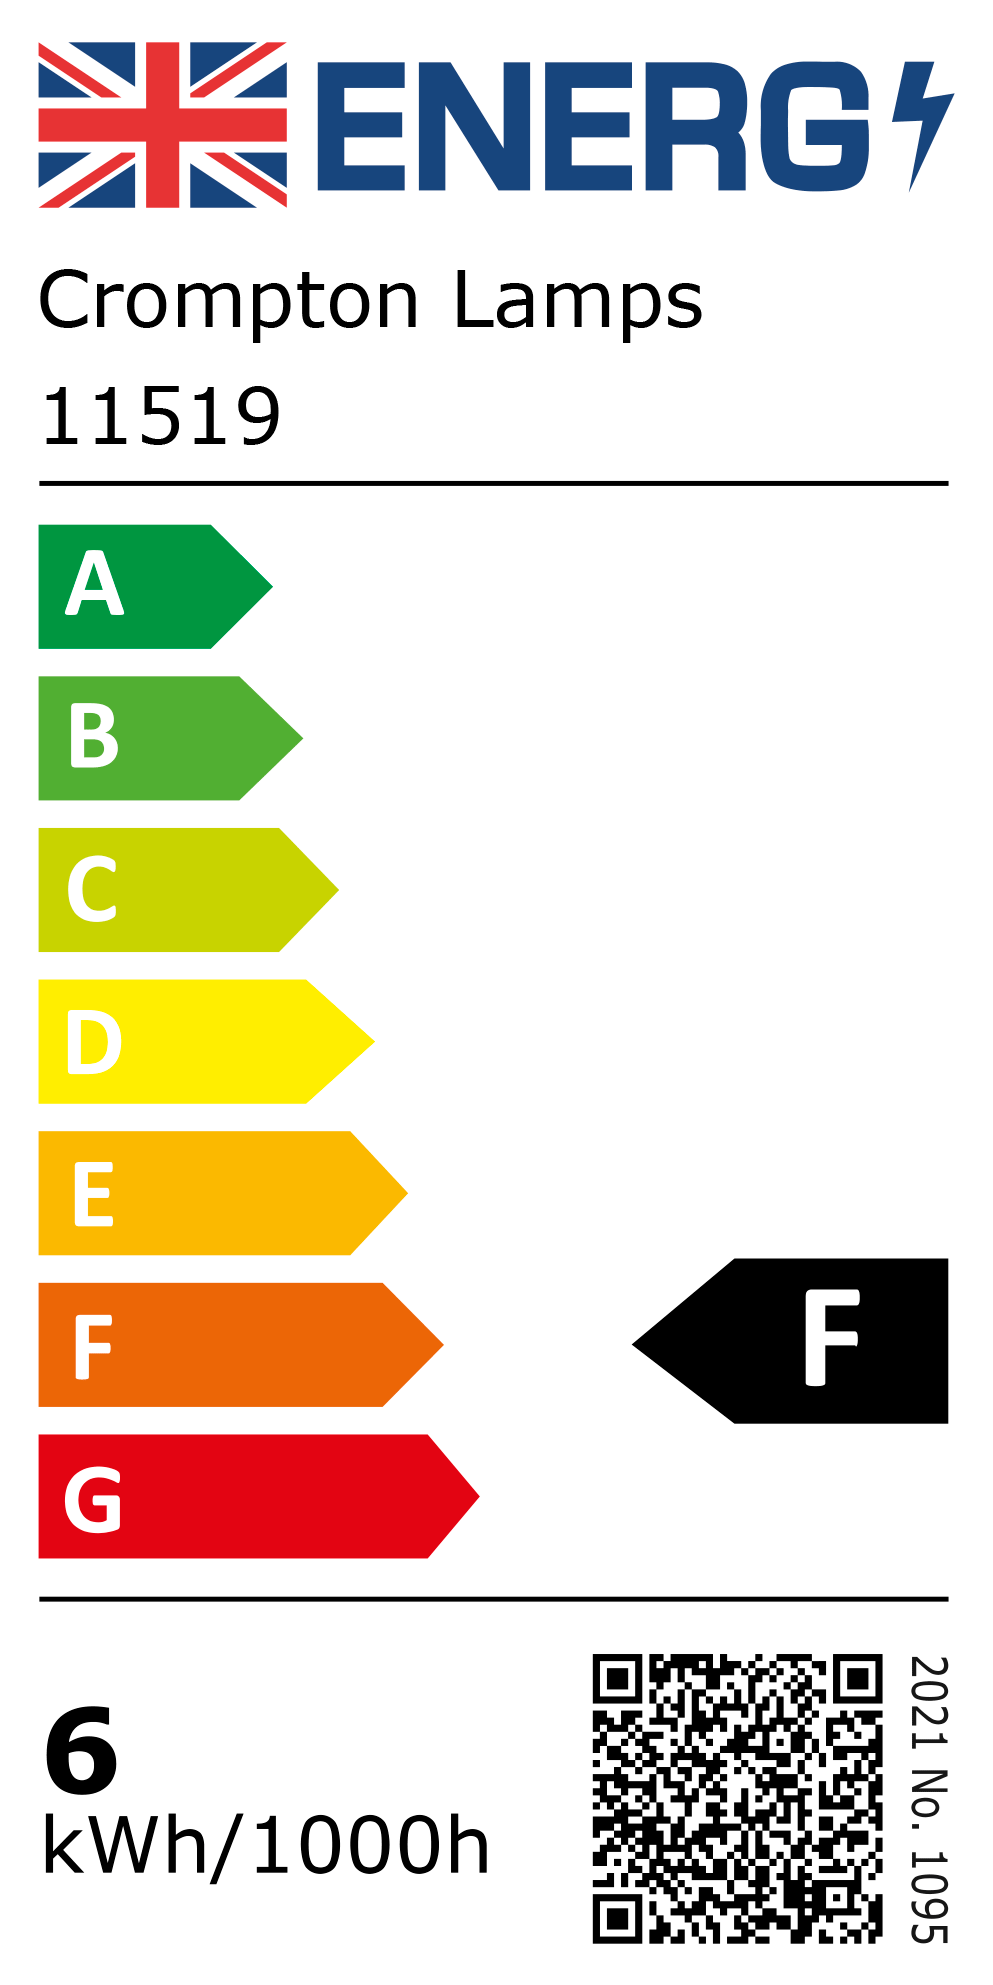 New 2021 Energy Rating Label: Stock Code 11519